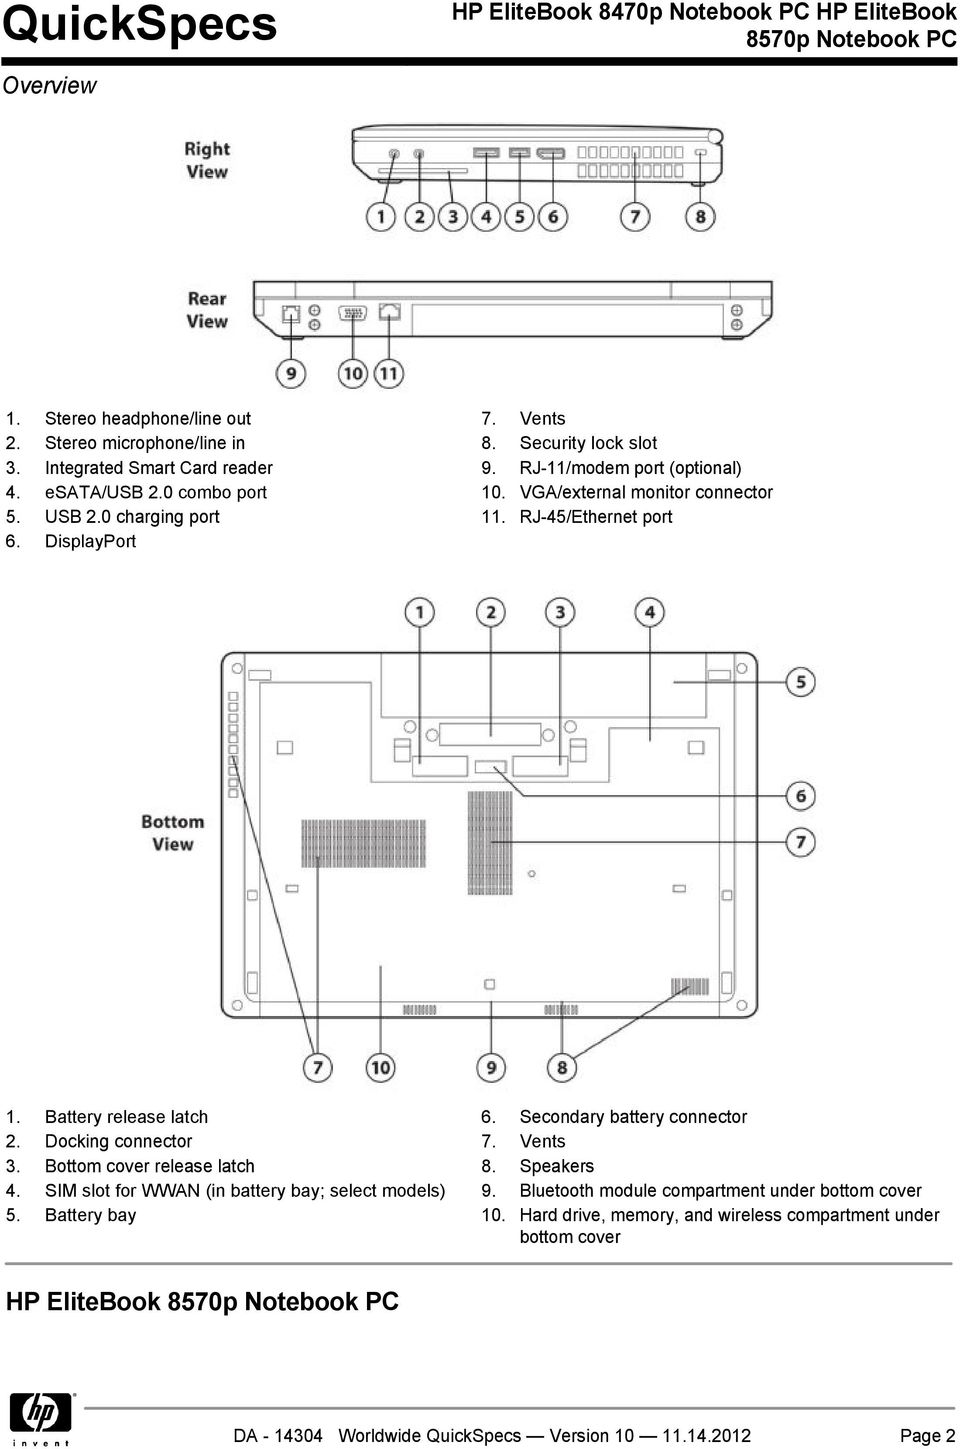 Secondary battery connector 2. Docking connector 7. Vents 3. Bottom cover release latch 8. Speakers 4. SIM slot for WWAN (in battery bay; select models) 9.